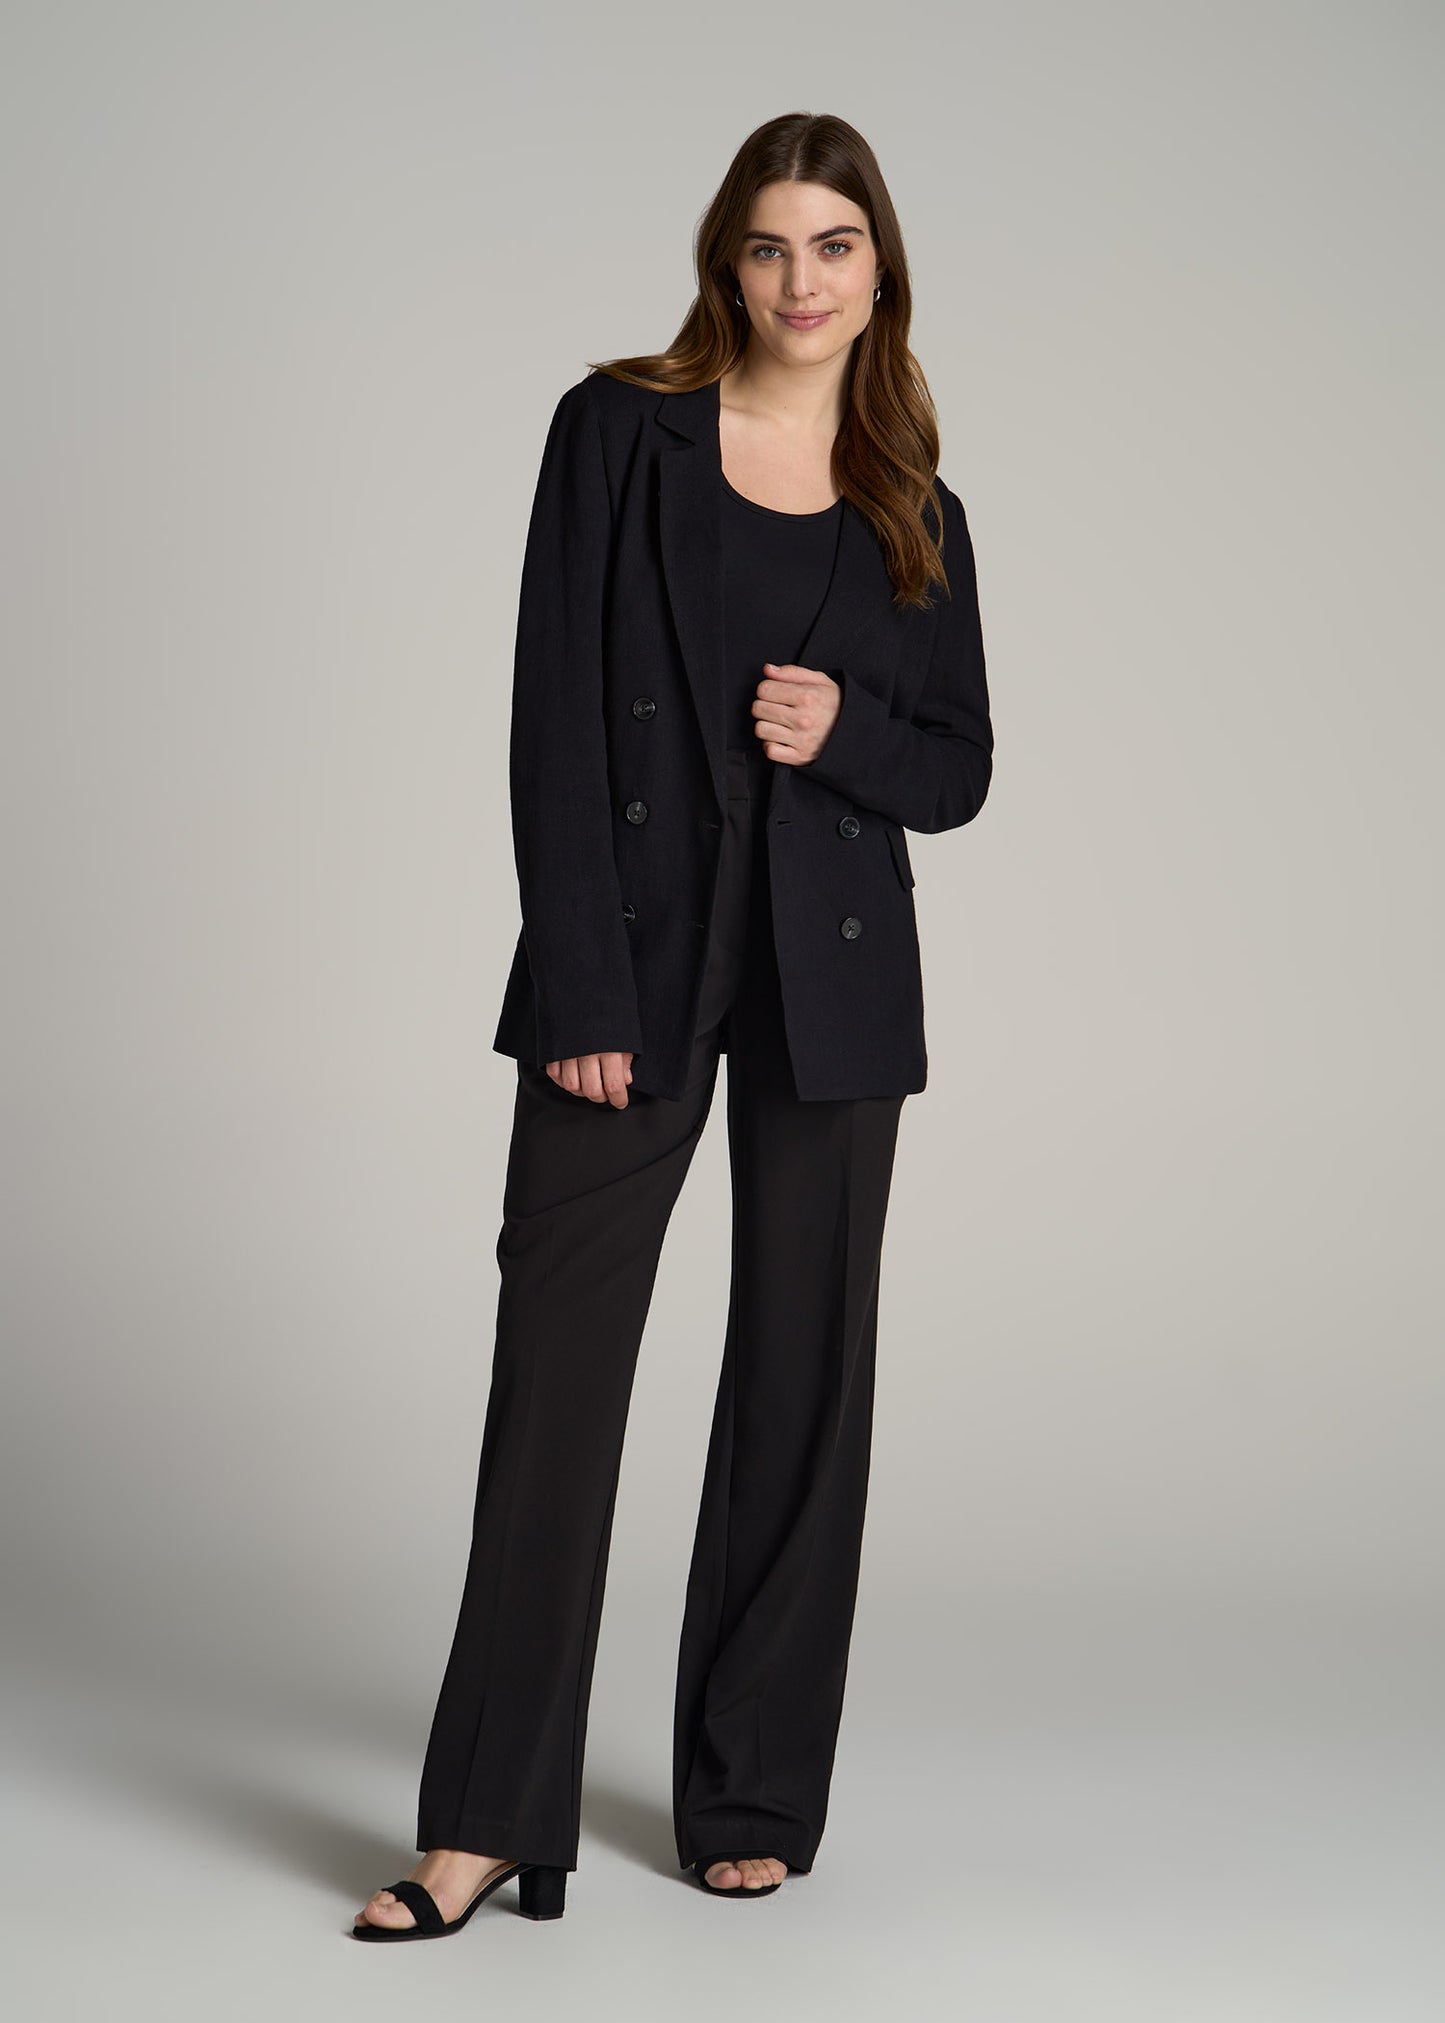 Best Work Outfits for Tall Women